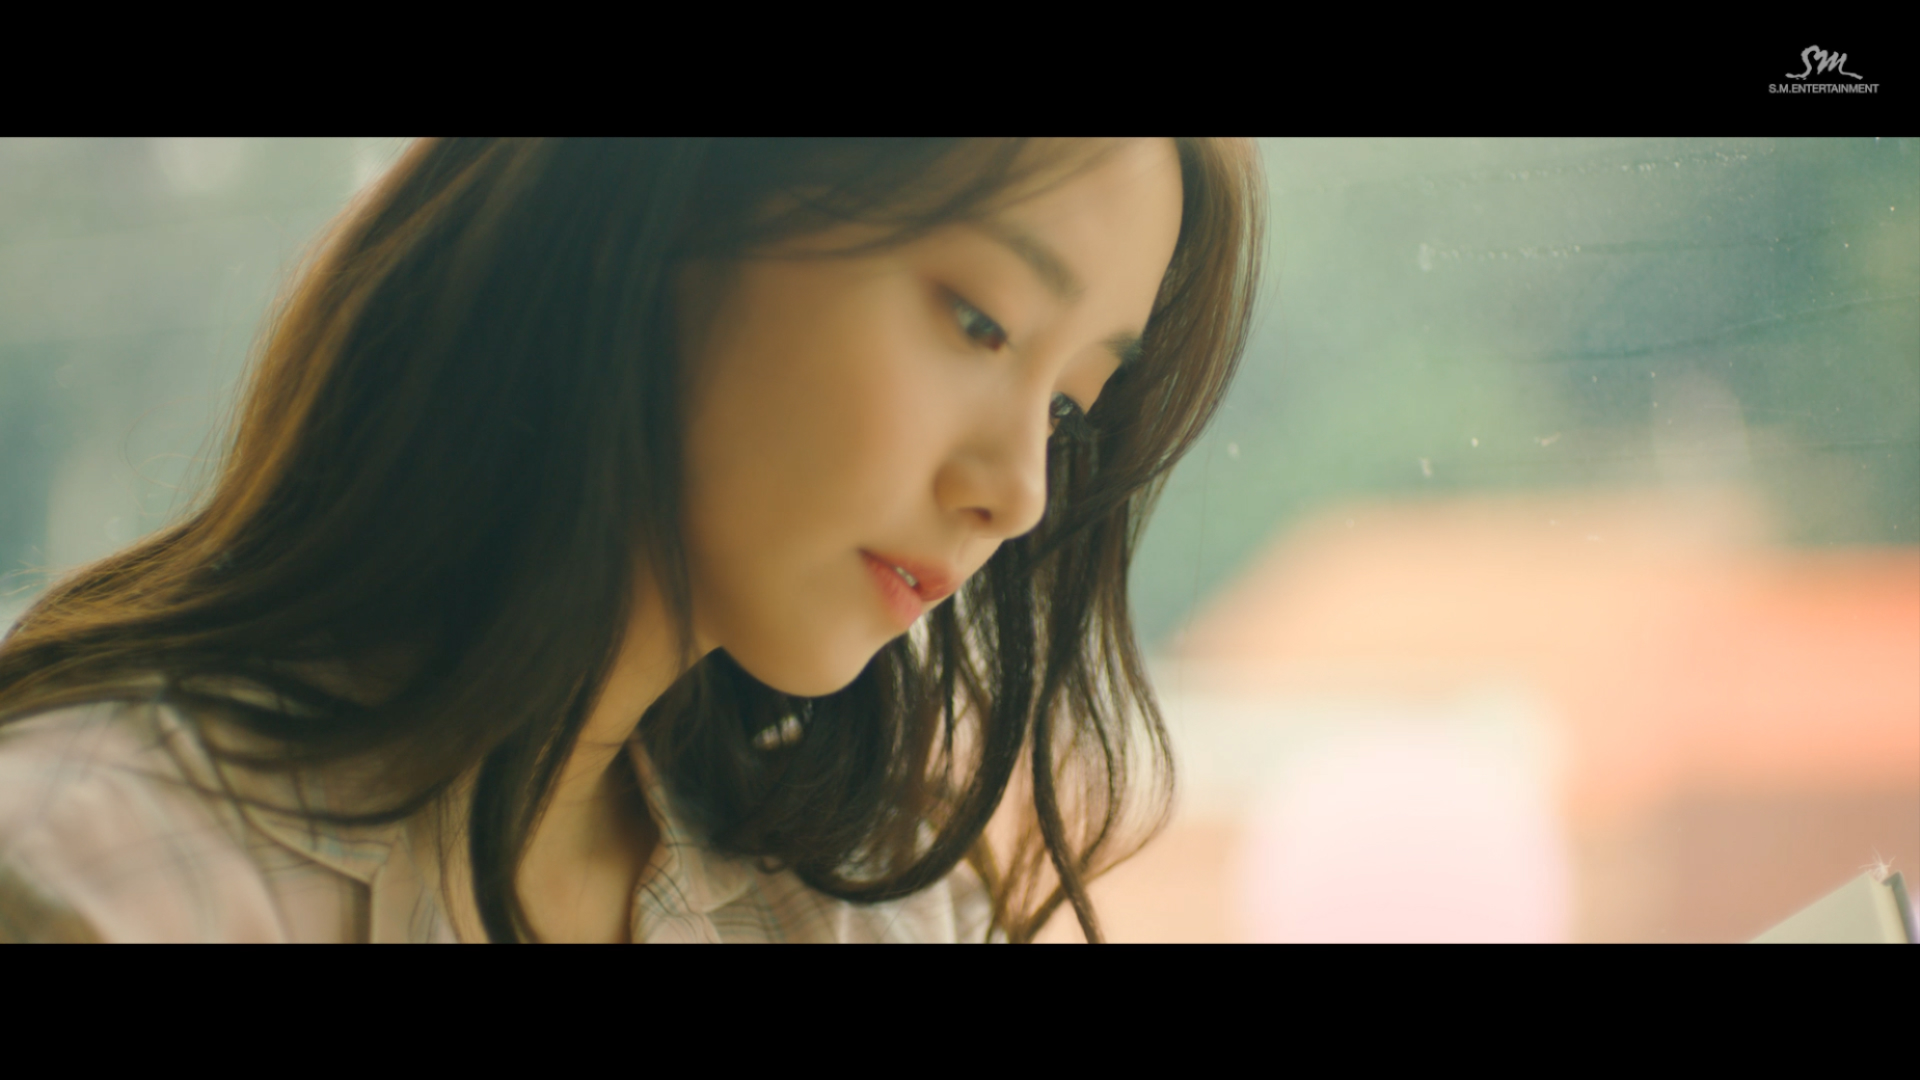 [STATION] YOONA 윤아_바람이 불면 (When The Wind Blows)_Music Video